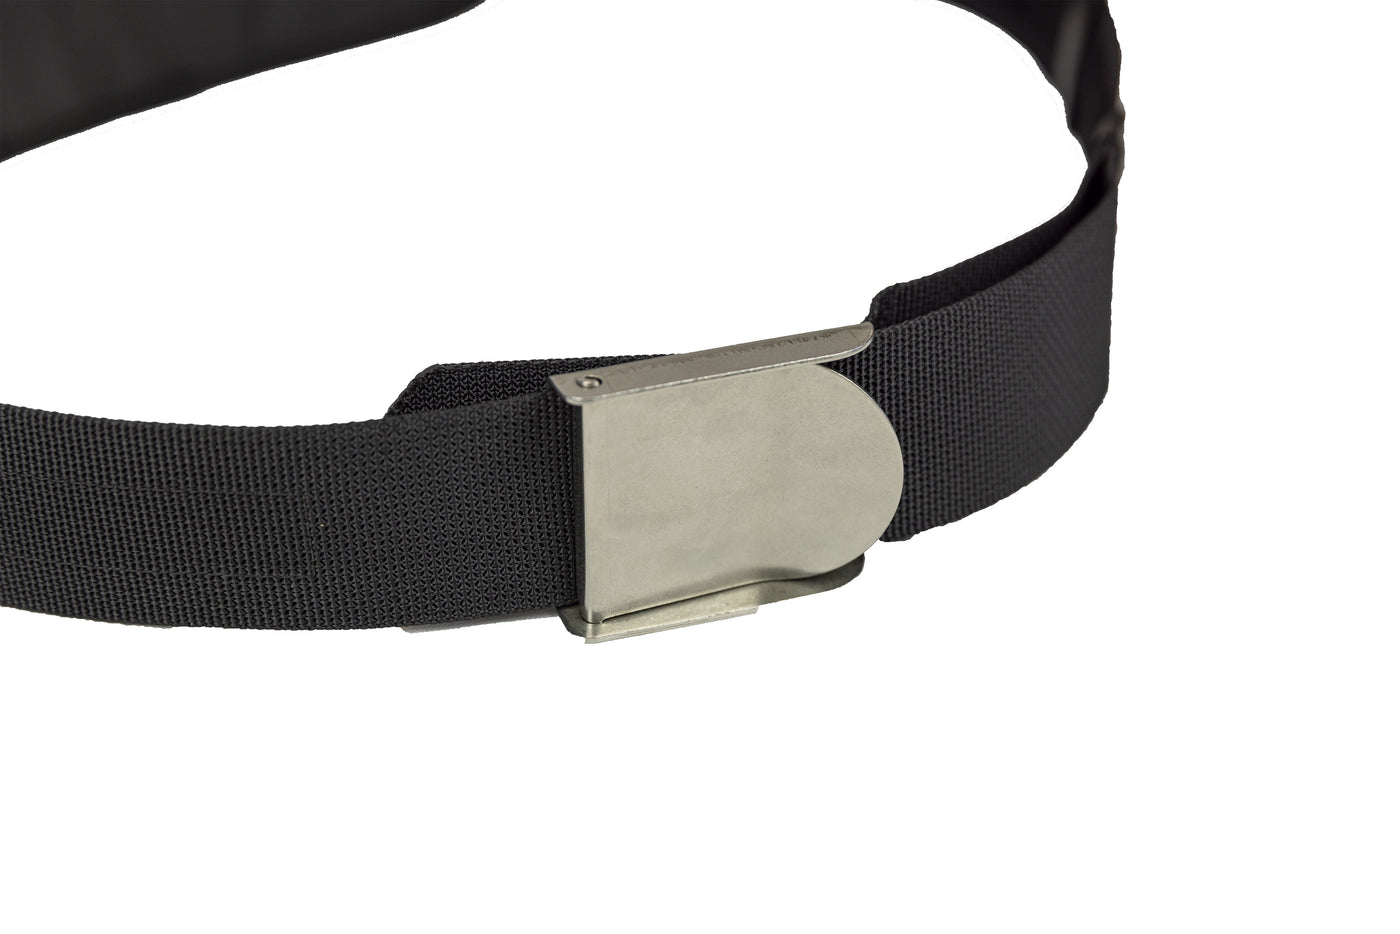 WEIGHT BELT WITHOUT POCKET MED-LGE (INCLUDES S/S BUCKLE)